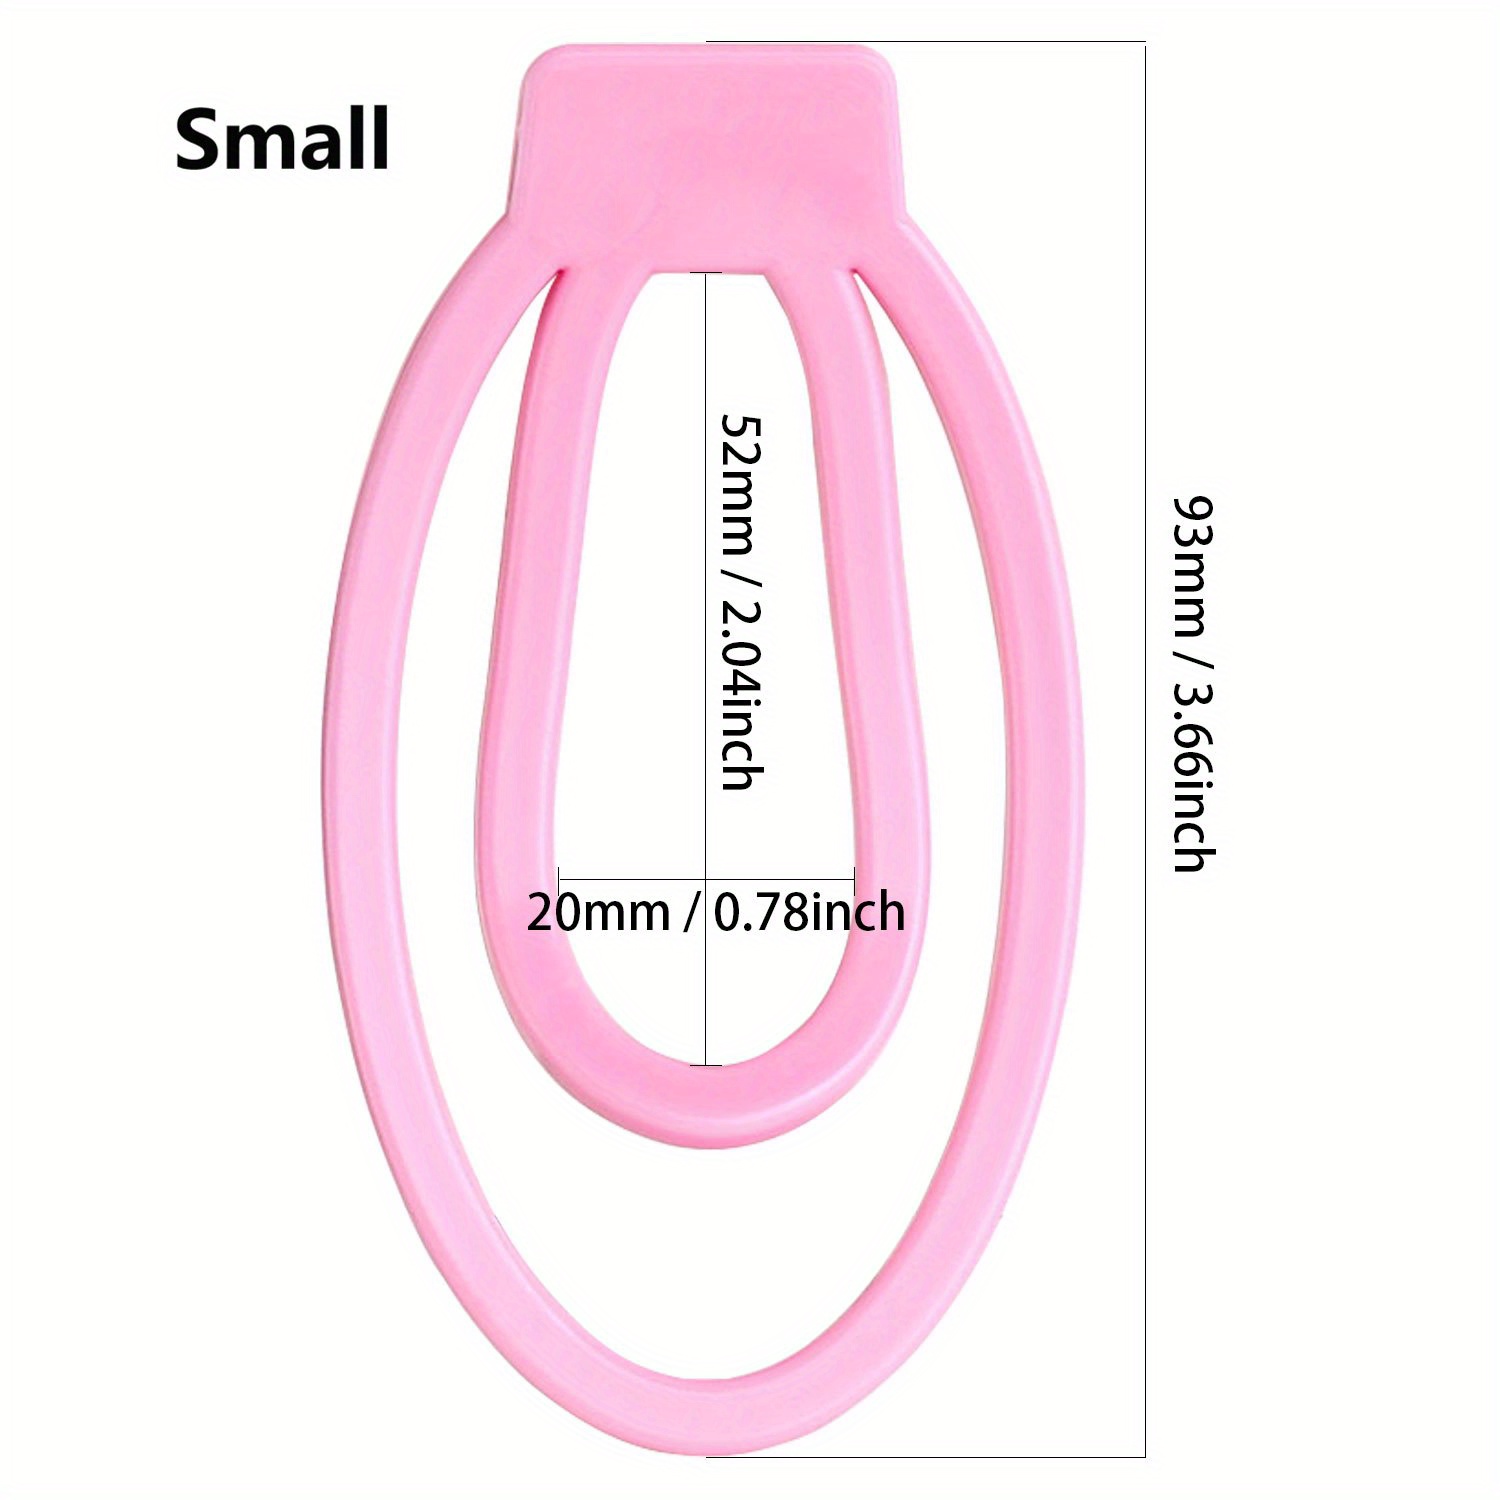 Panty Chastity With The Fufu Clip,Male Chastity Training Device